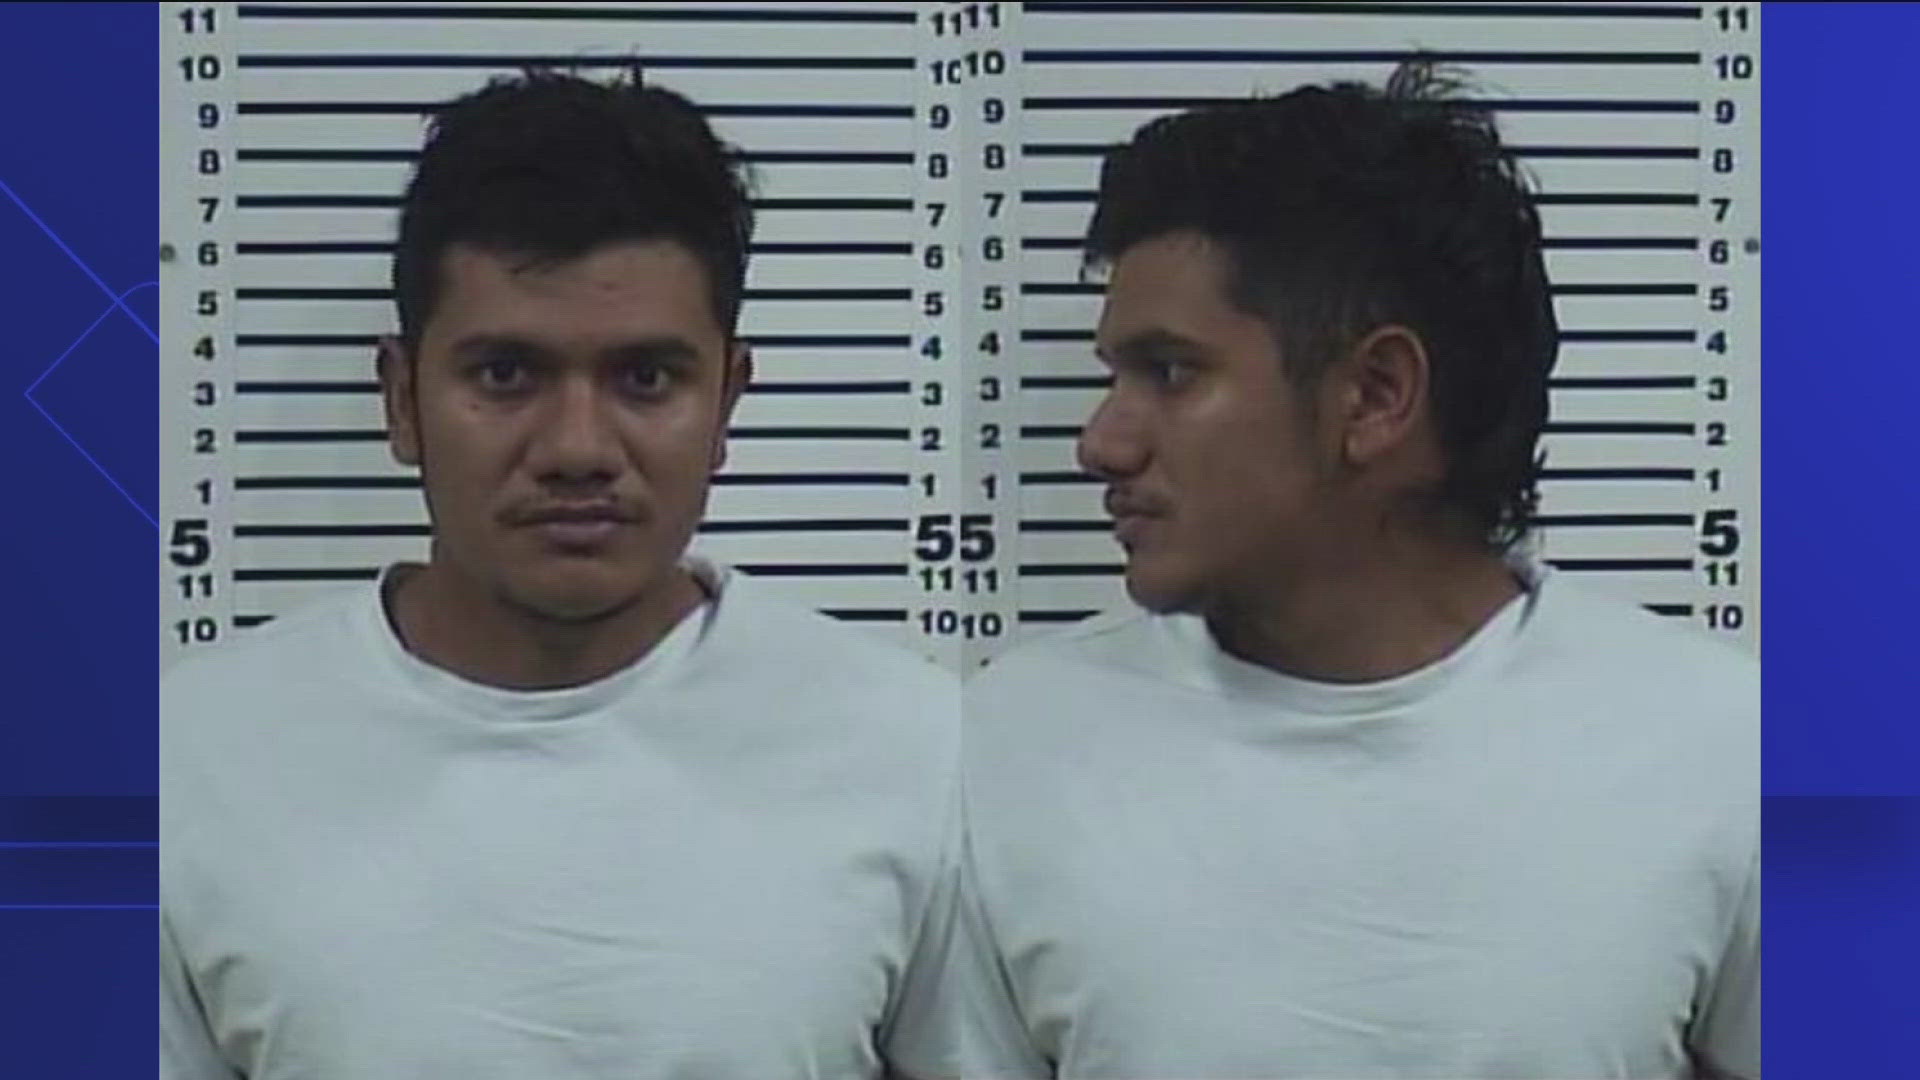 Idaho State Police arrested Luis Garcia-Diaz of Rexburg, who police said was the driver in an Idaho Falls crash that killed six and injured nine others.